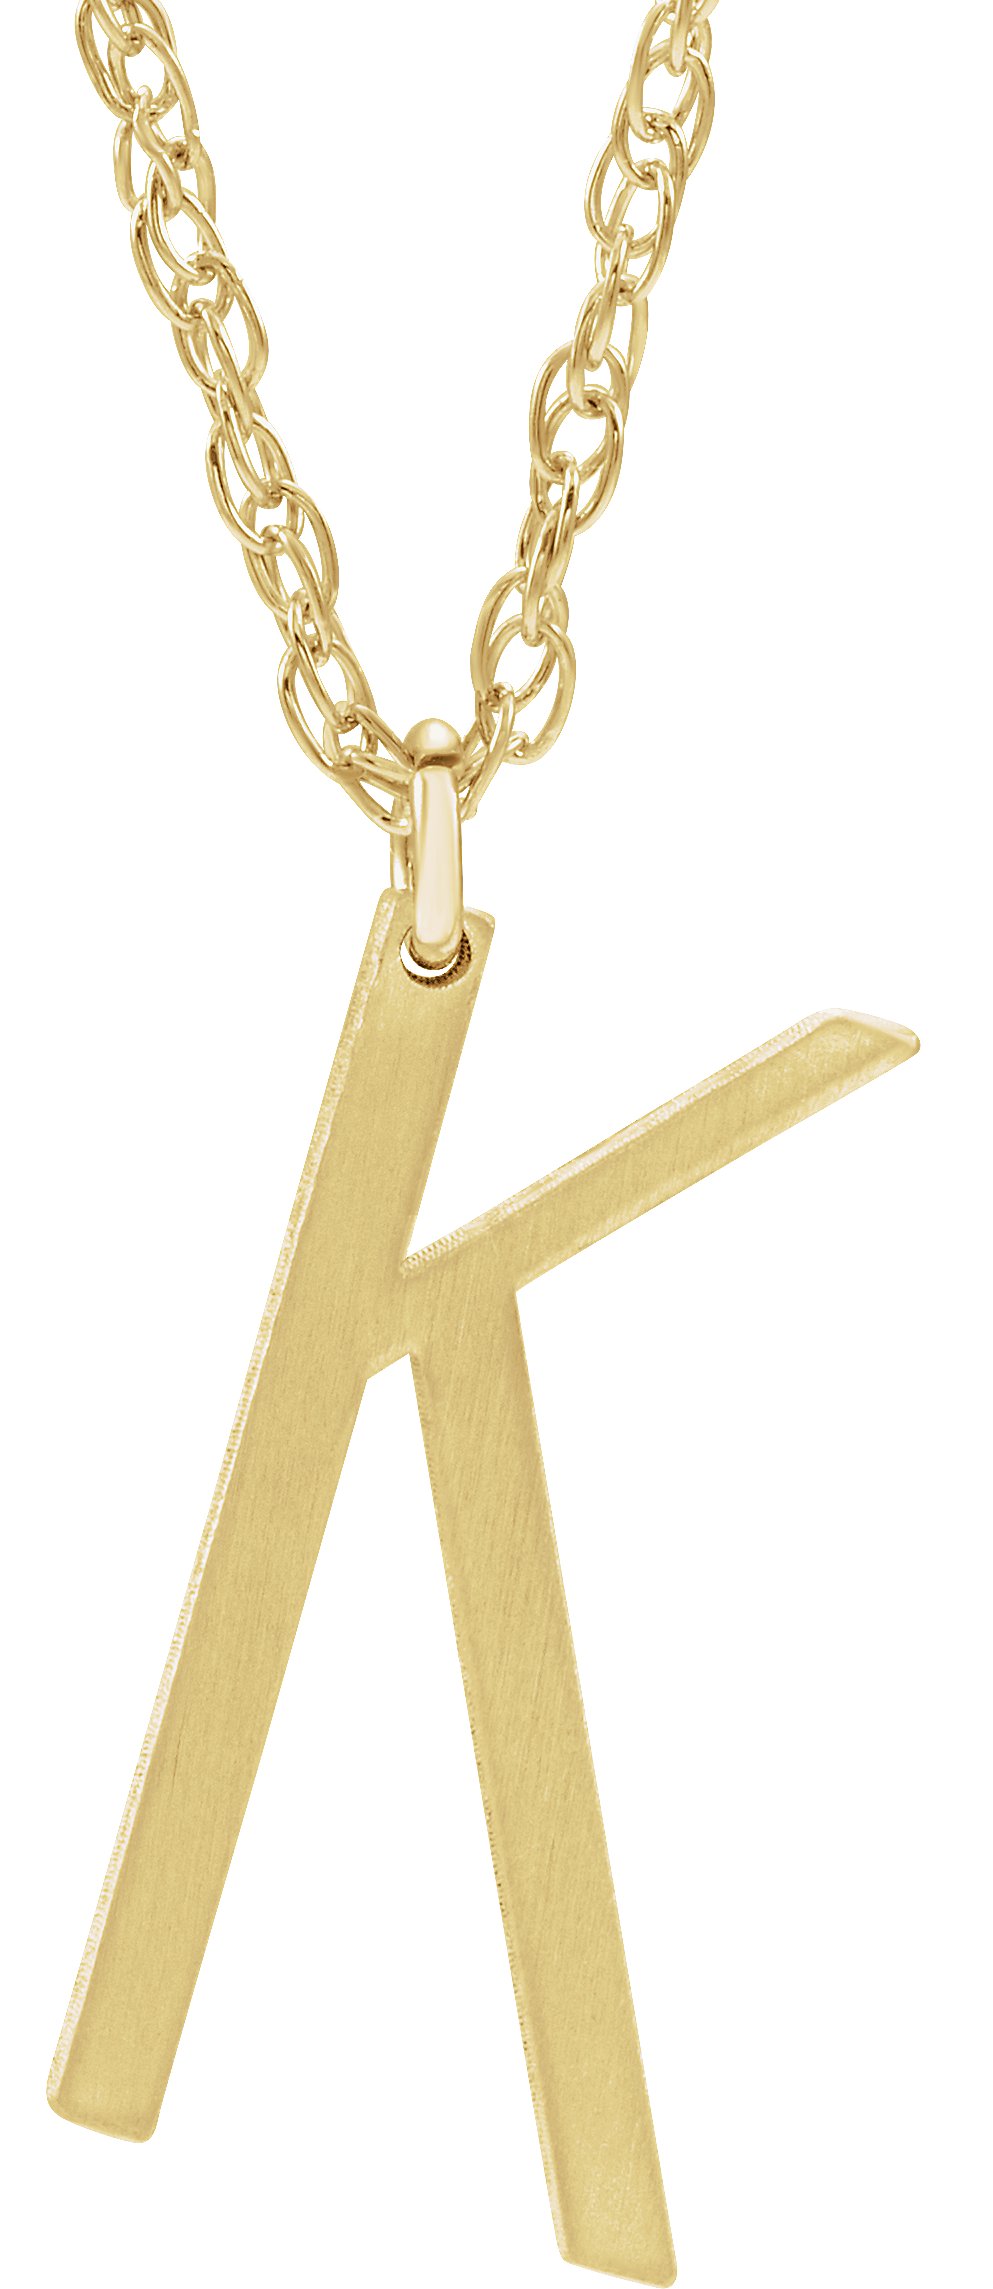 14K Yellow Gold-Plated Sterling Silver Block Initial K 16-18" Necklace with Brush Finish